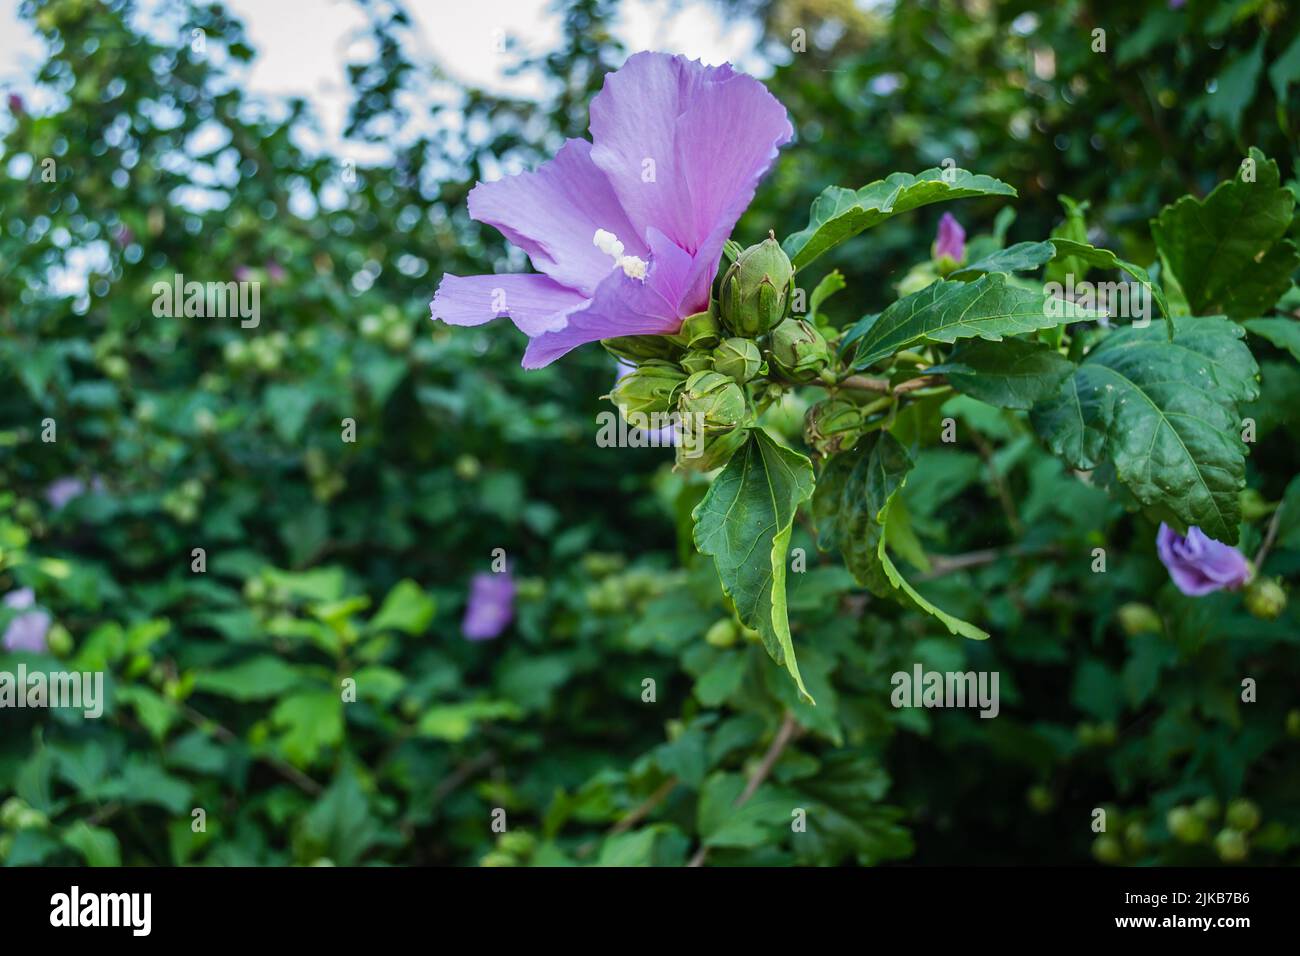 Purple hibiscus flowers from the garden. Close-up of pink and purple hibiscus flowers. Summer flowers that grow in the garden. Stock Photo